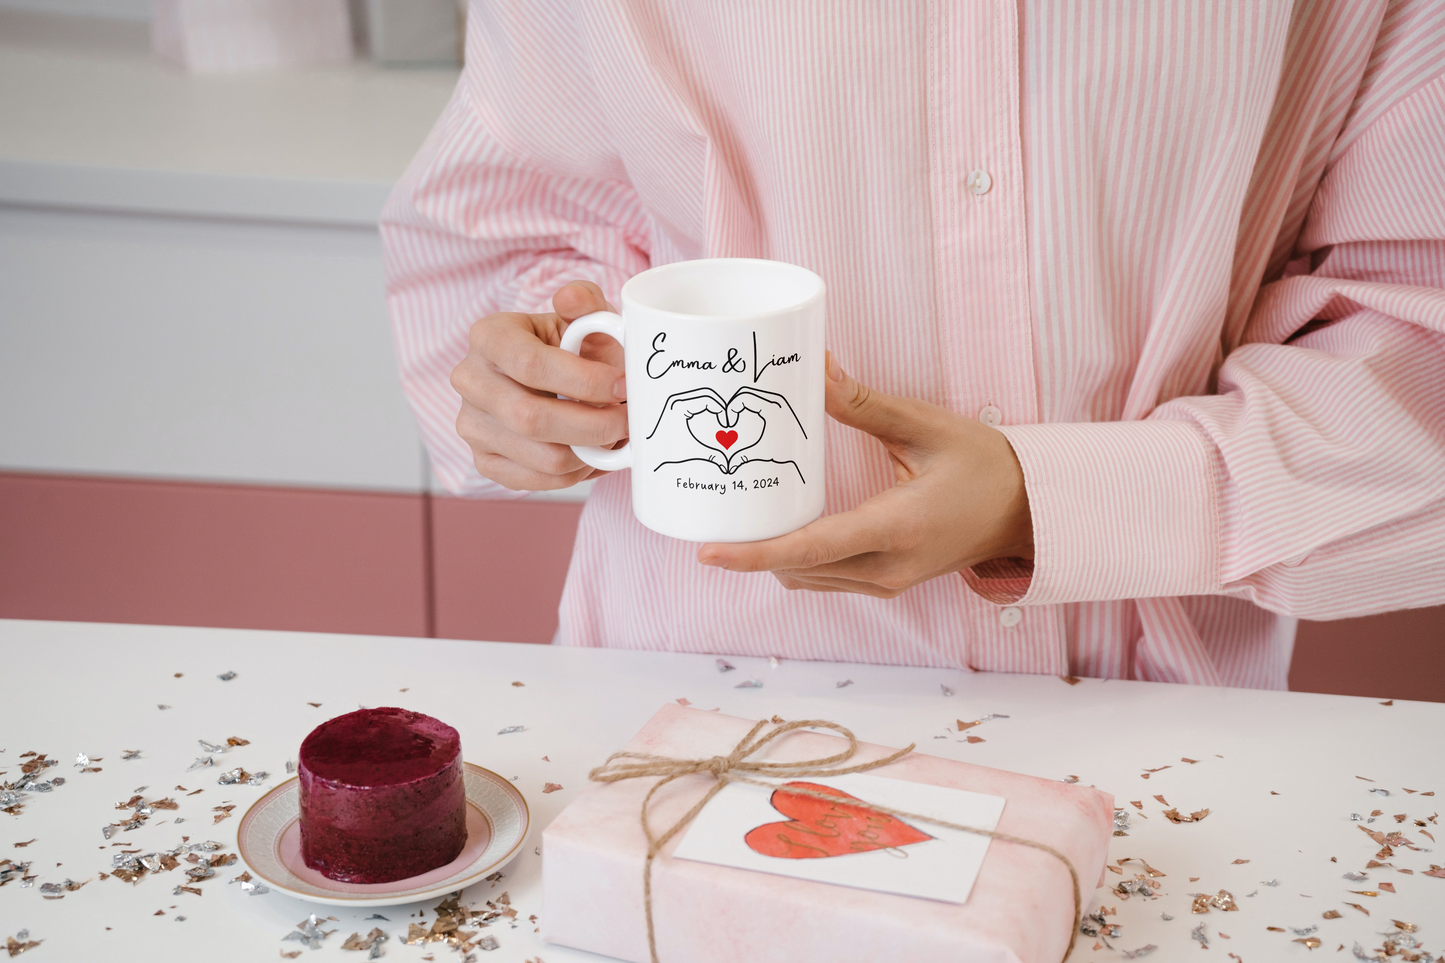 White Custom Couple Mug Set/Personalized Wedding Gift/Heart Gift for Her/Valentine's Day Gift Idea /Girlfriend Gifts